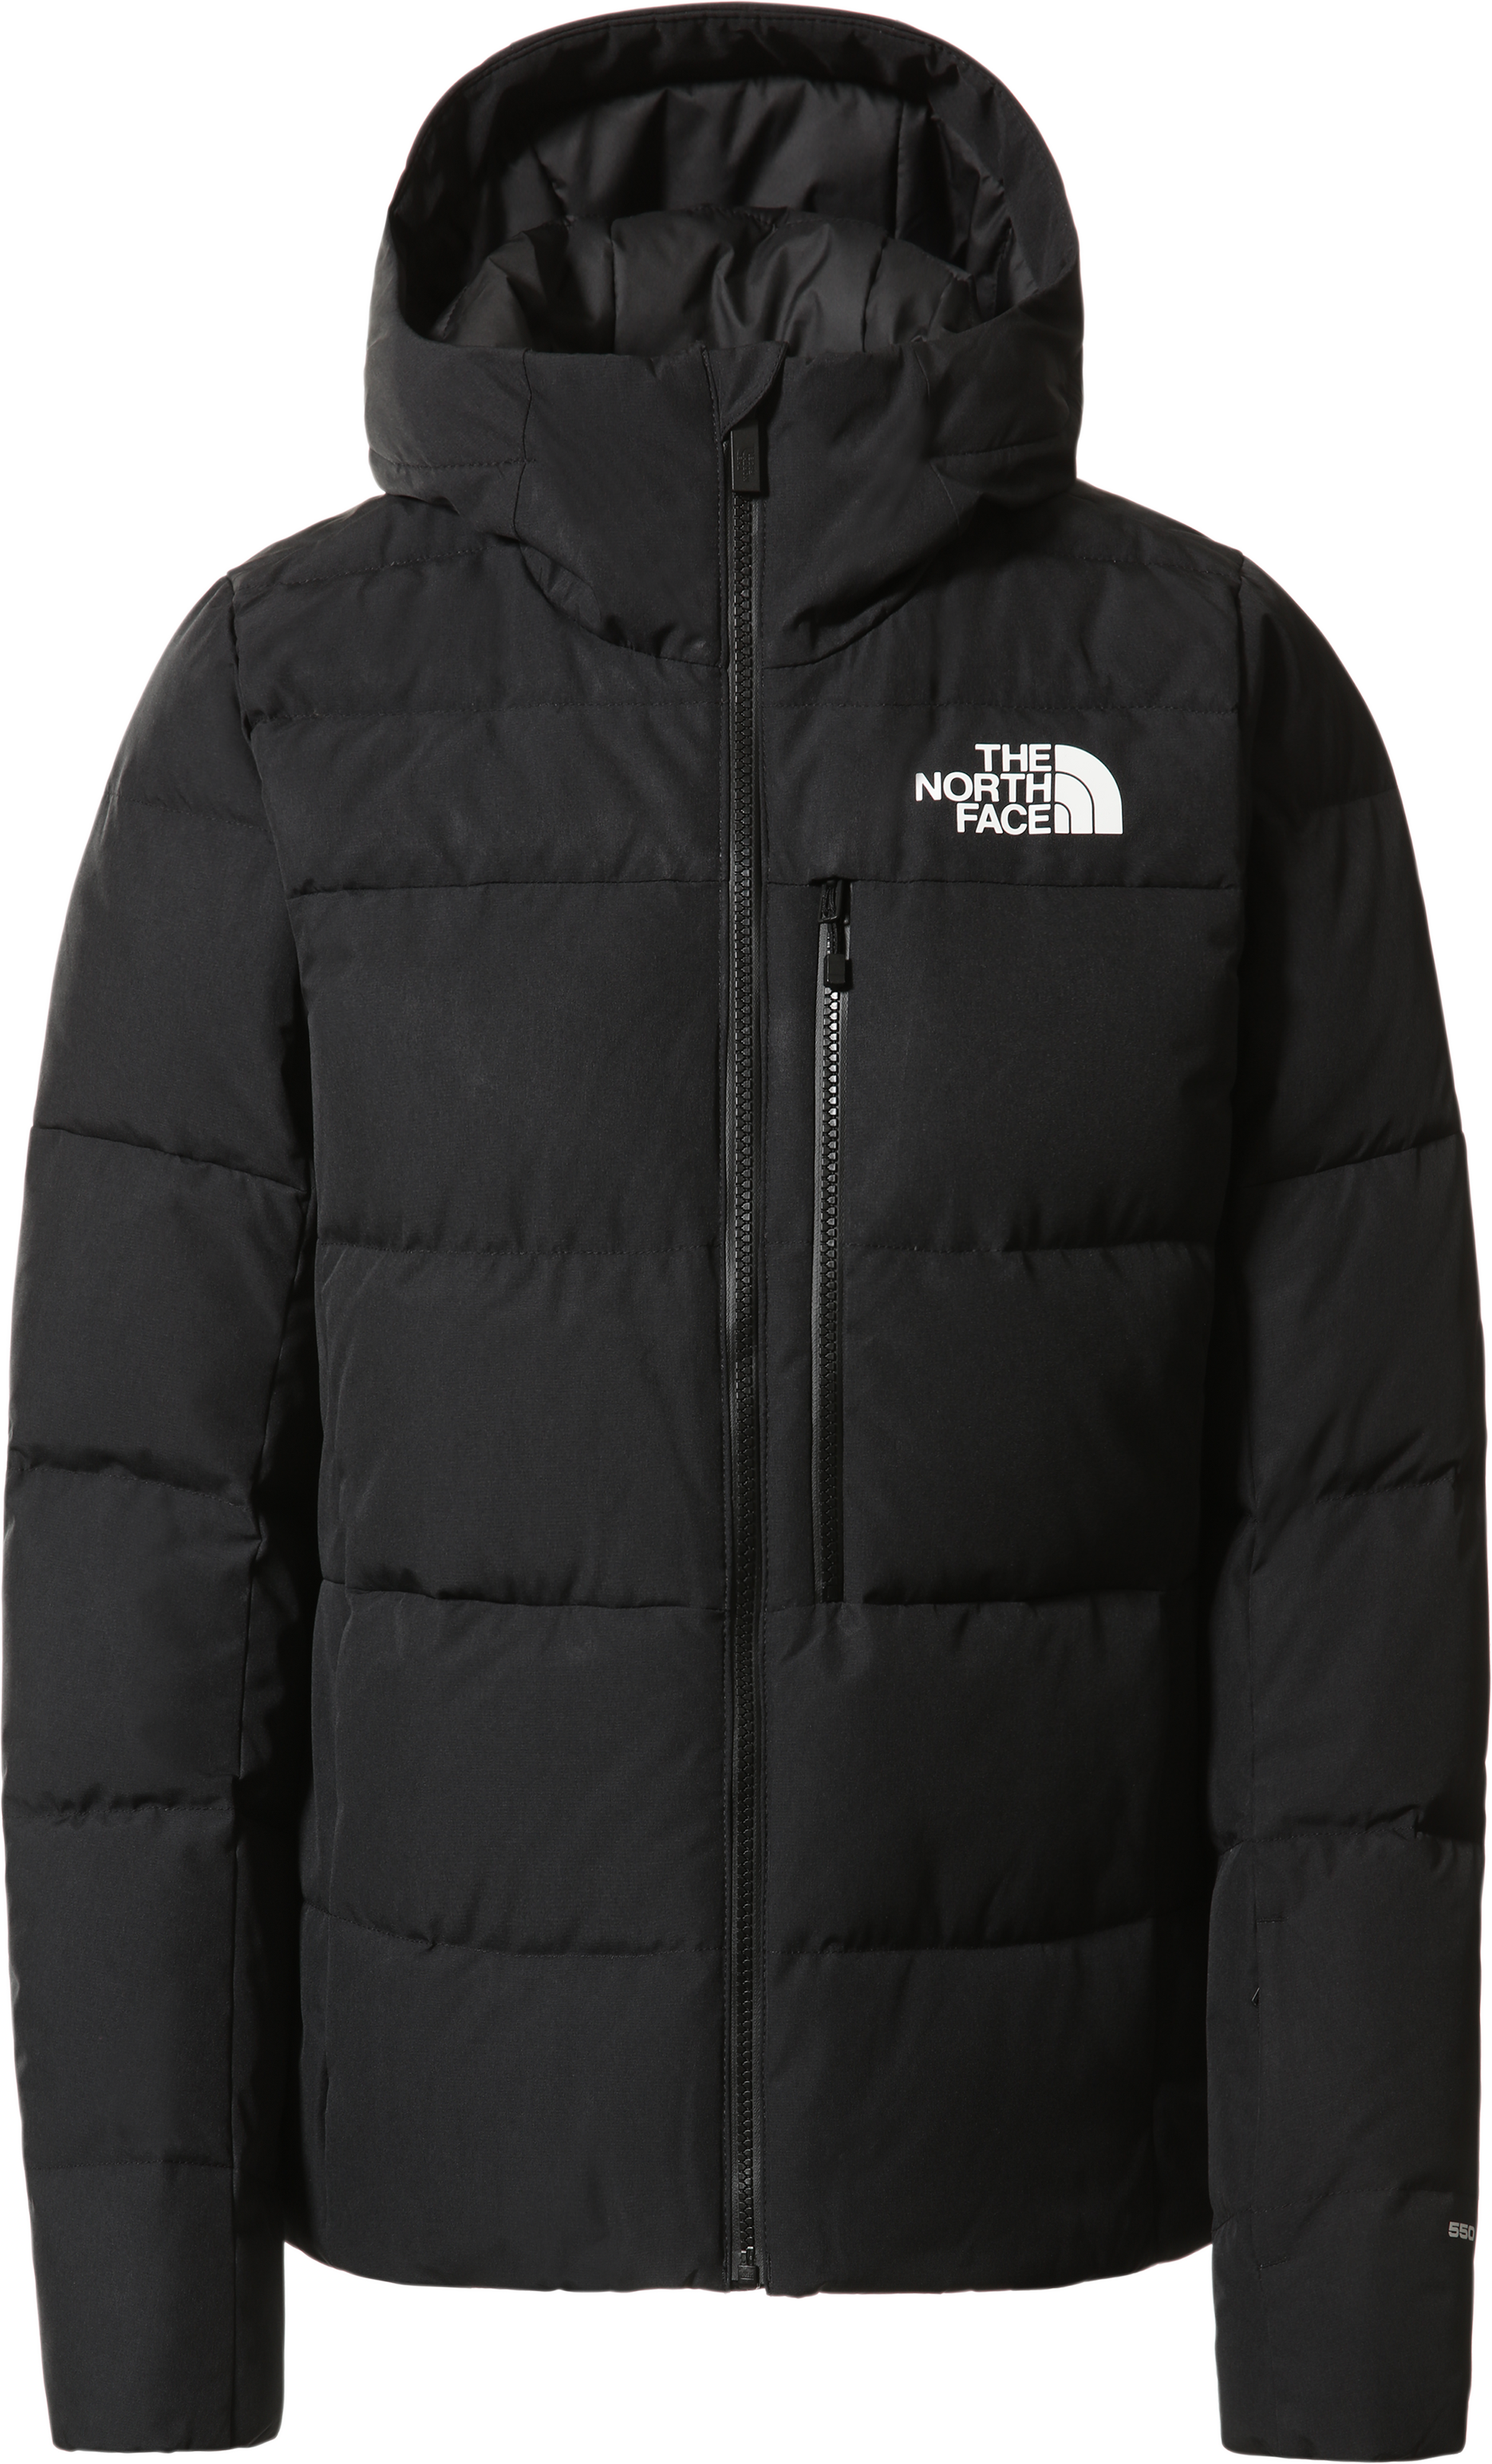 The North Face Women’s Heavenly Down Jacket Tnf Black